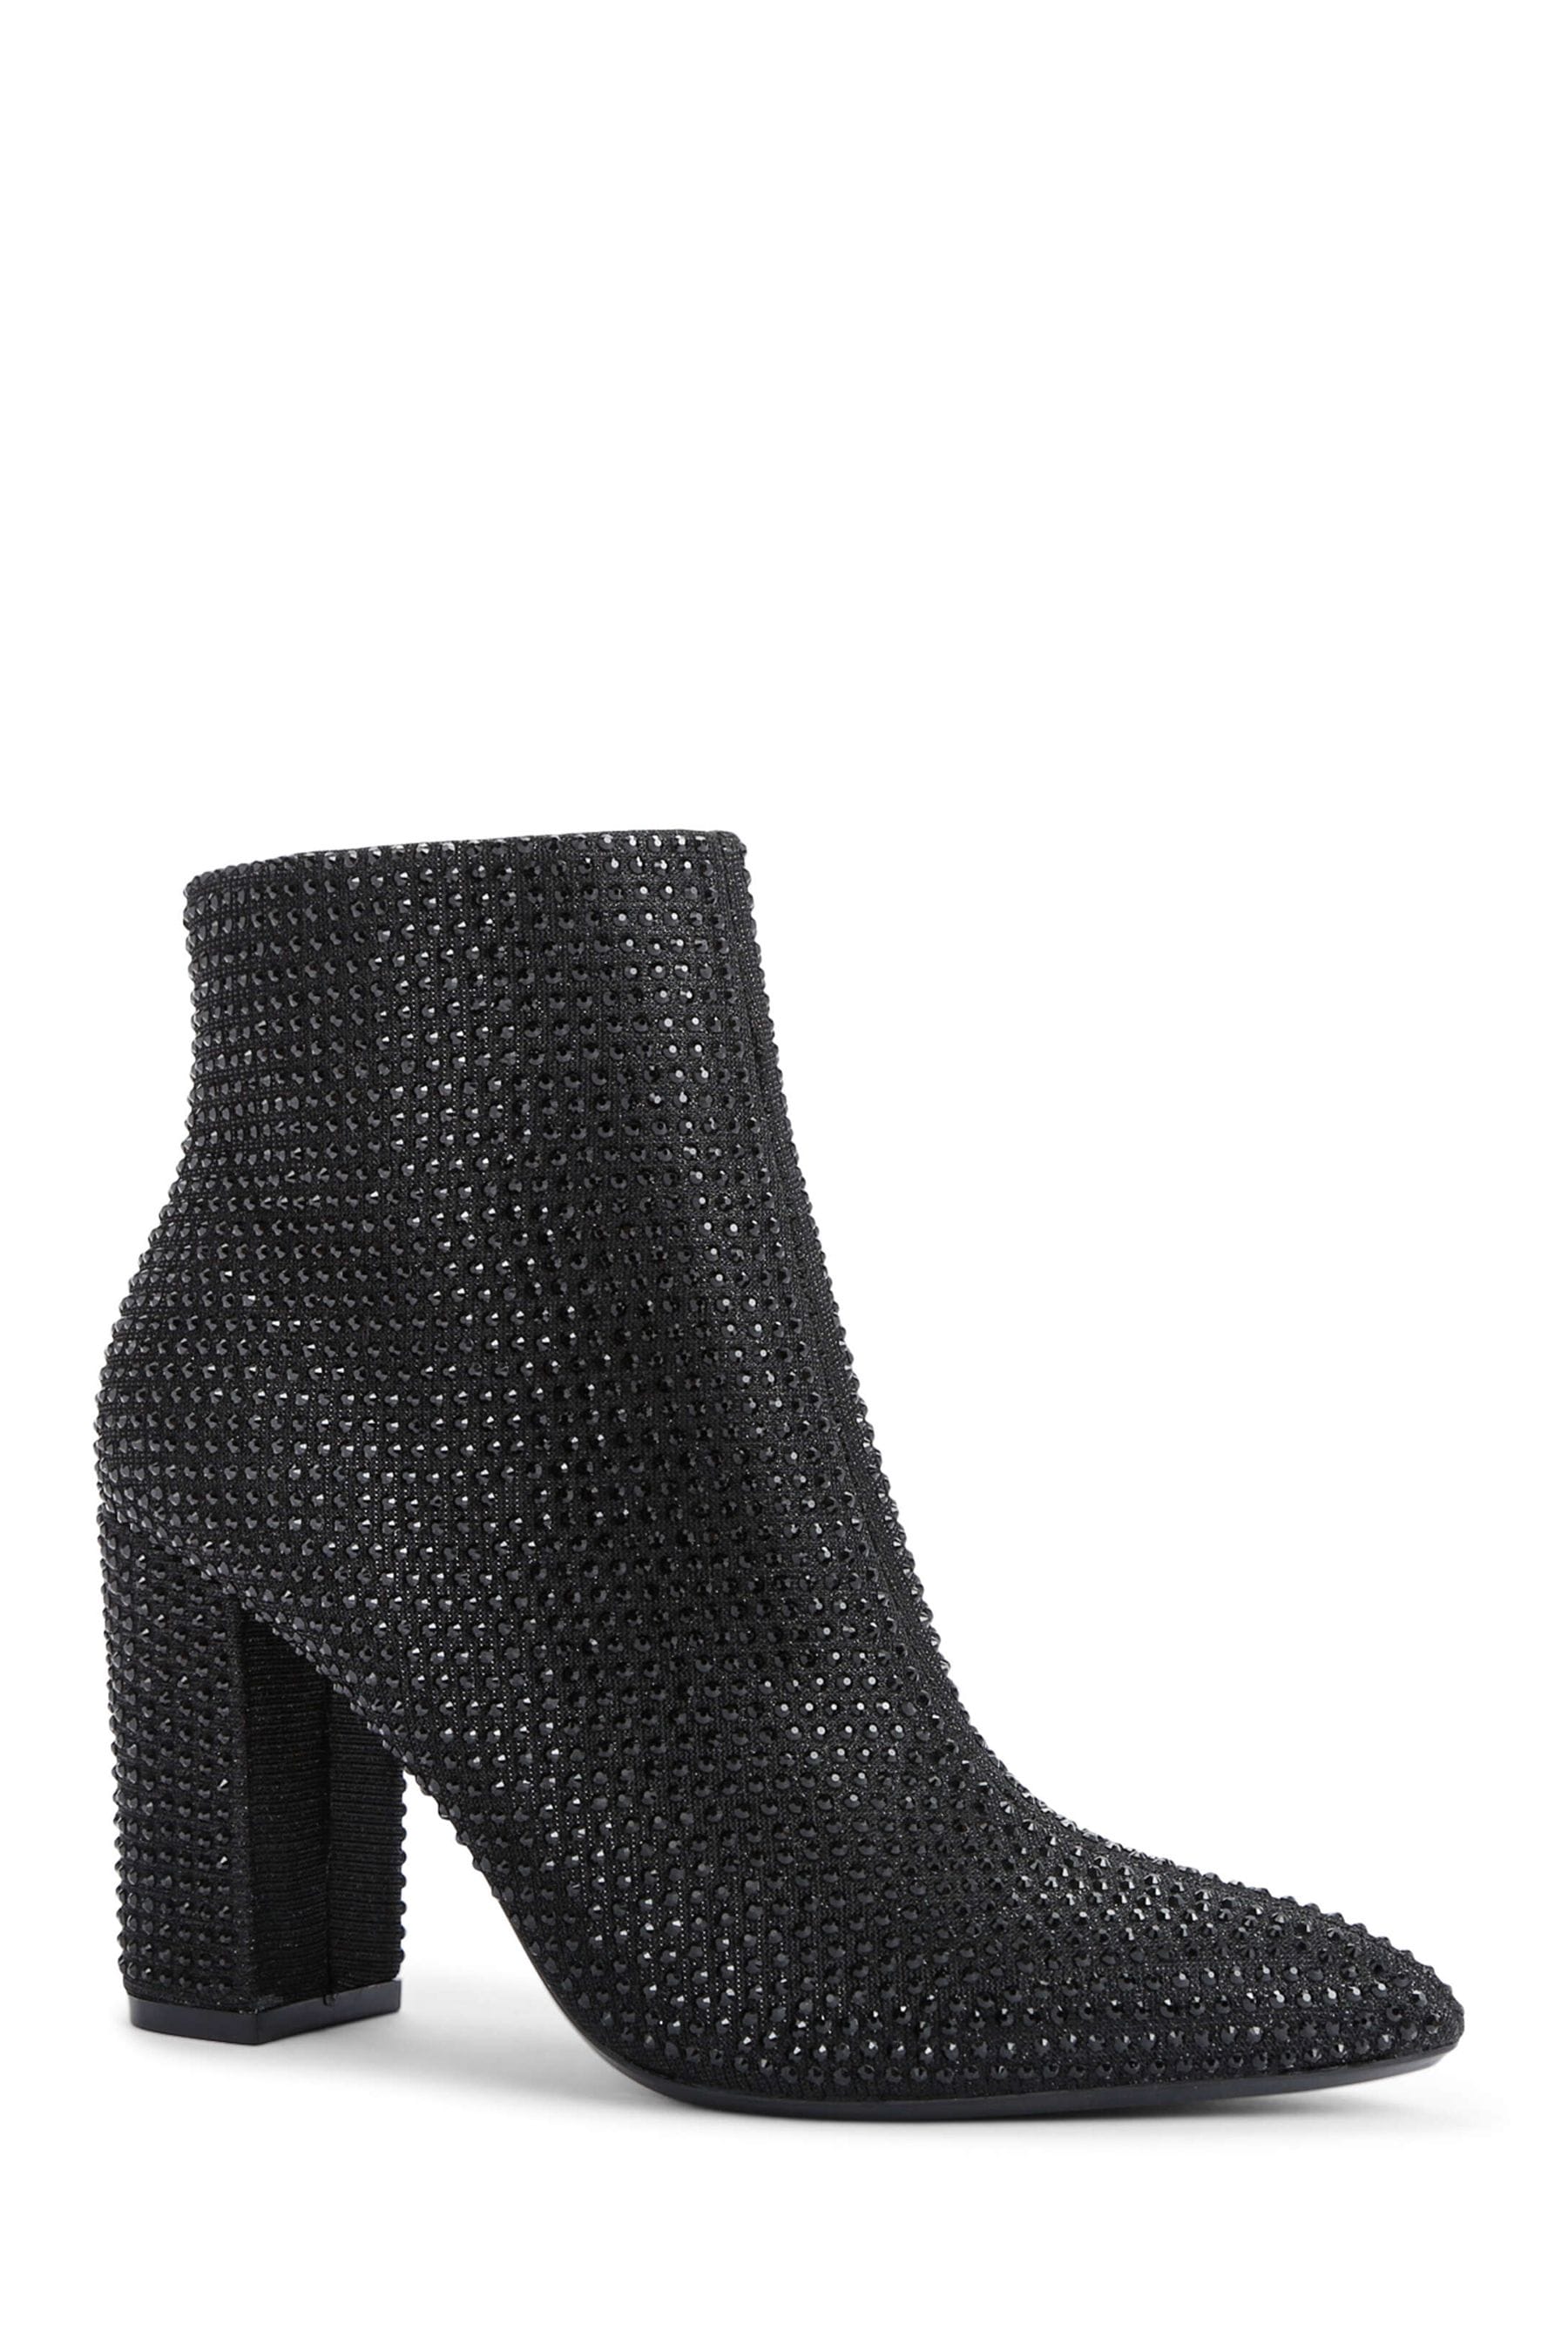 Buy Carvela Shone Black Ankle Boots from the Next UK online shop